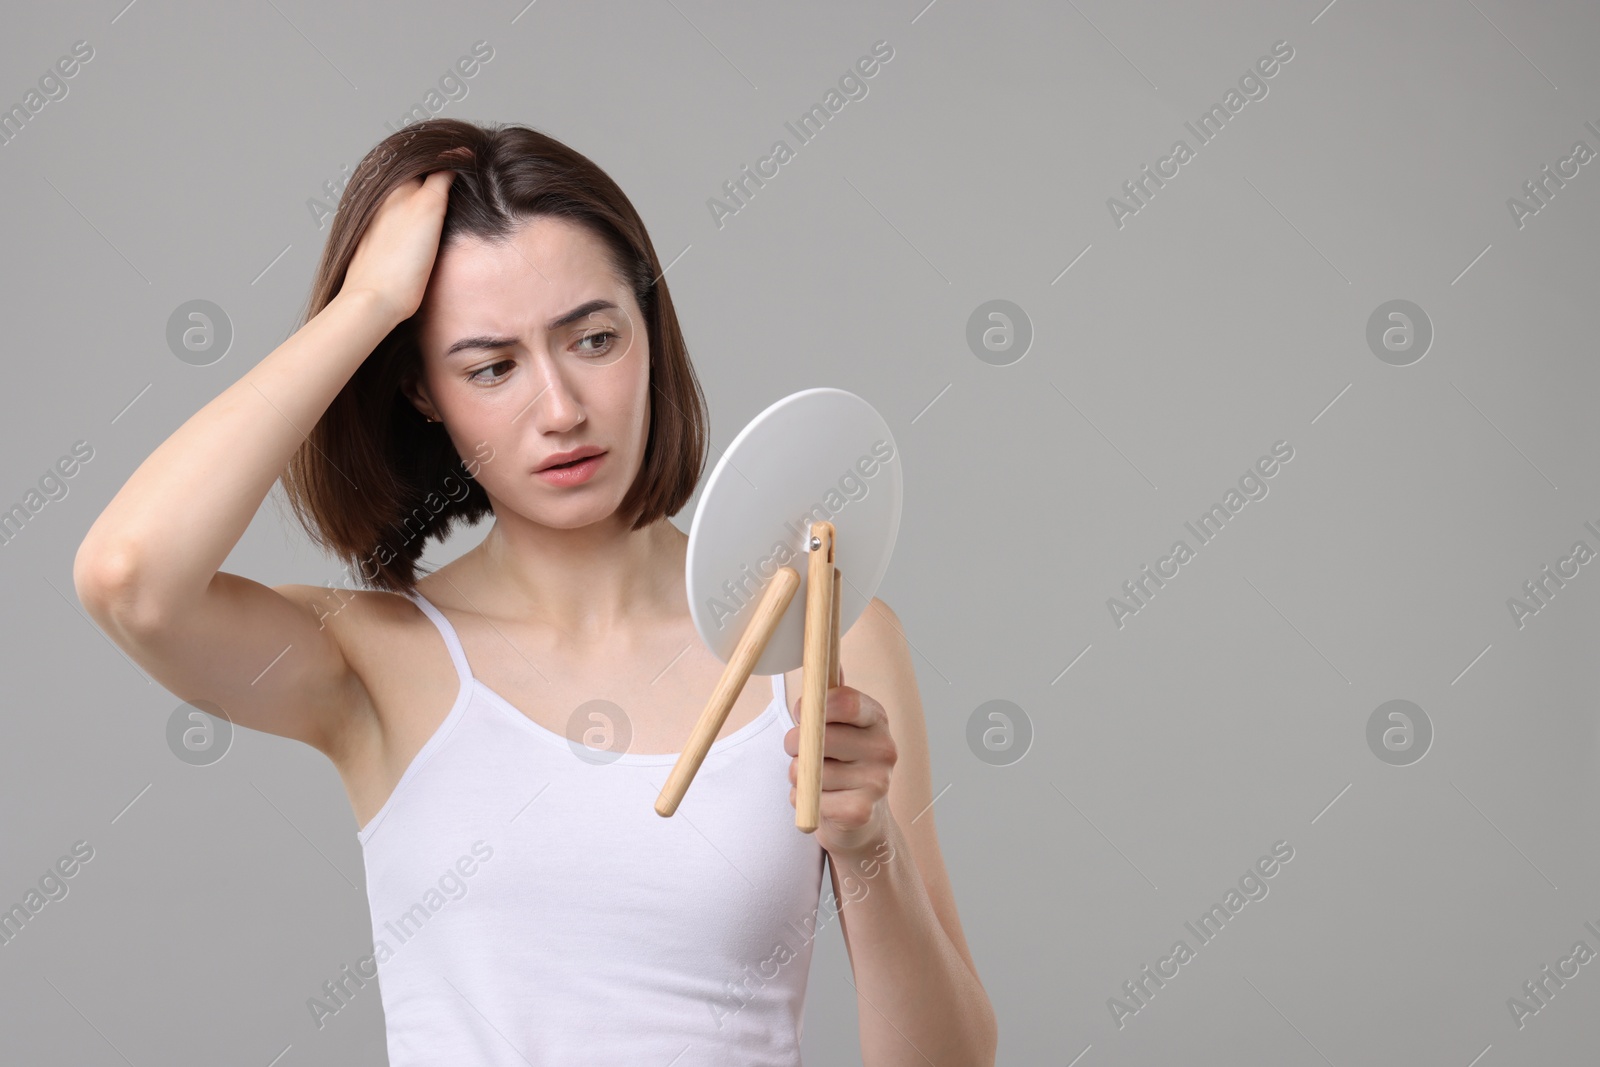 Photo of Sad woman with hair loss problem looking at mirror on grey background. Space for text